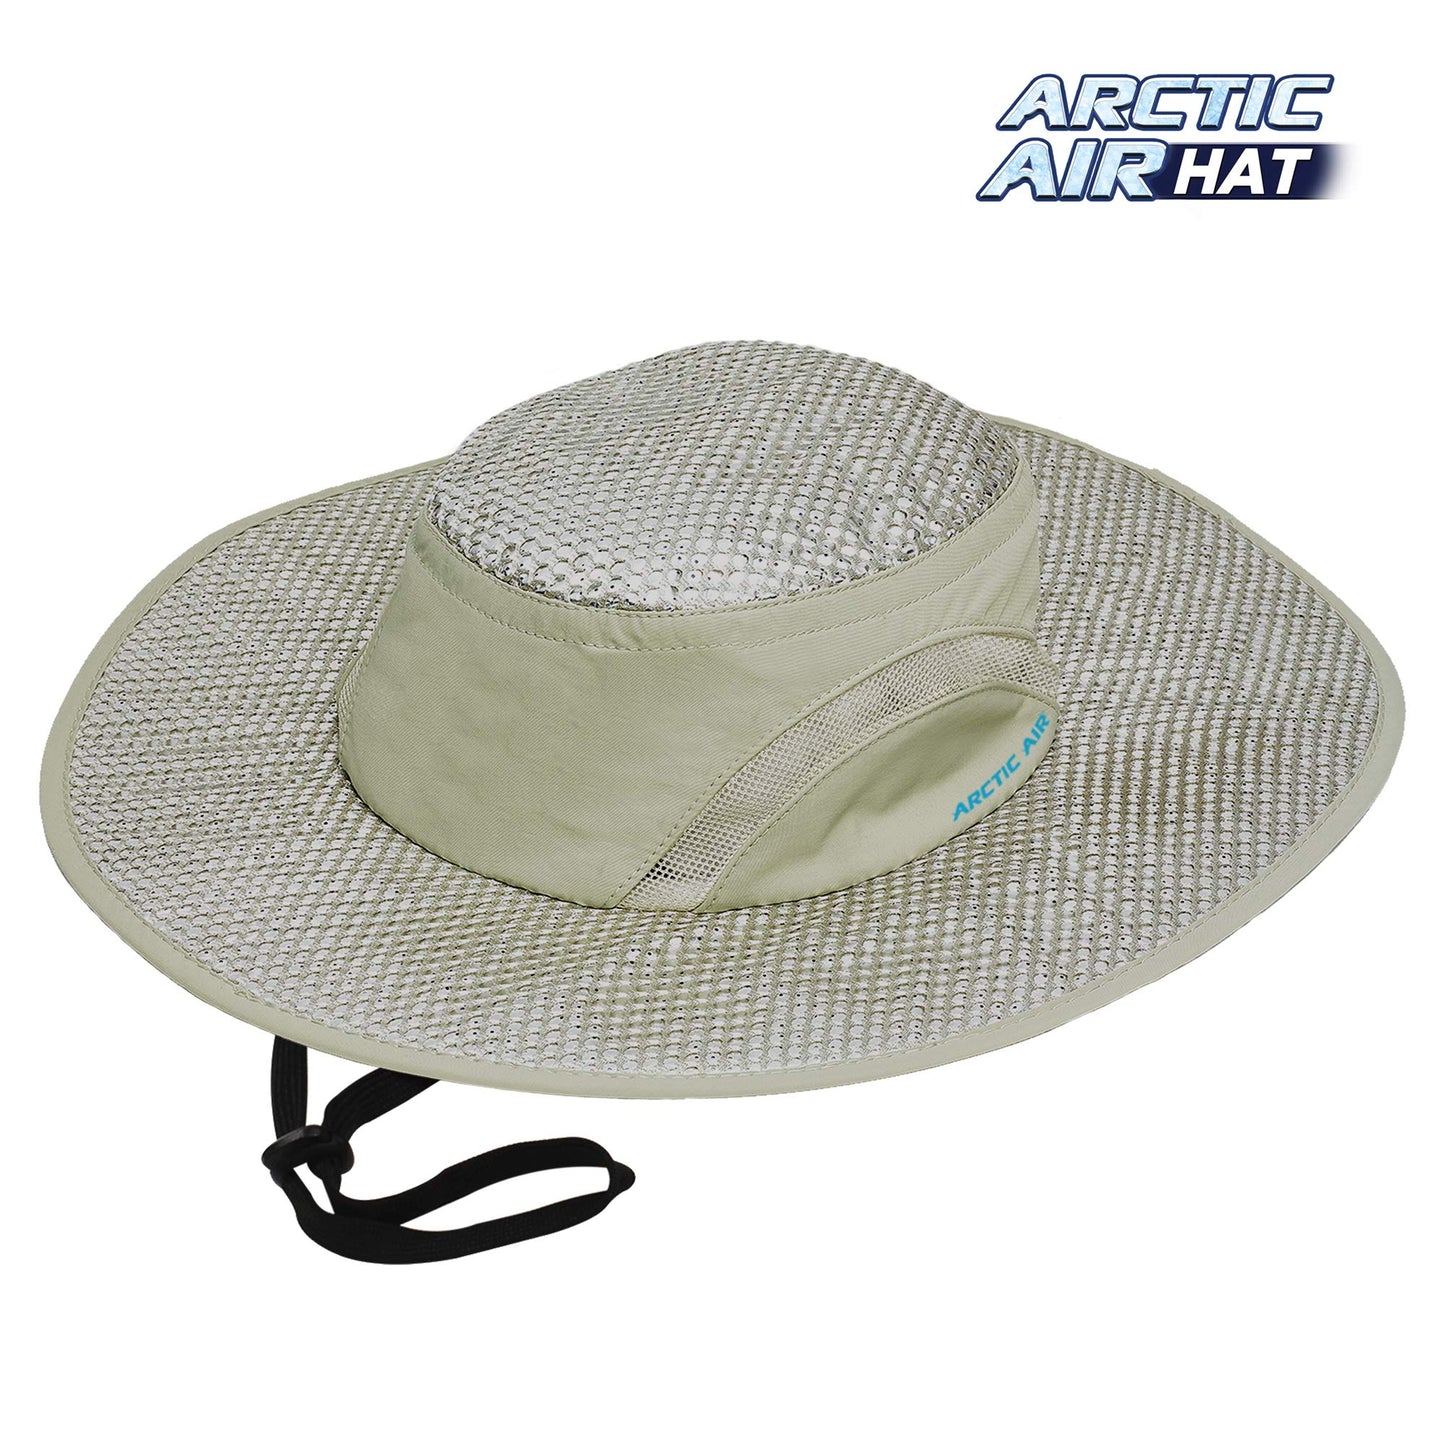 Arctic Air Evaporative Cooling Hat - UV Reflective Technology for Protection from UV Rays, Hydro-Chill Evaporative Cooling Liner, Beige, One Size (Adjustable) - Sun Hat